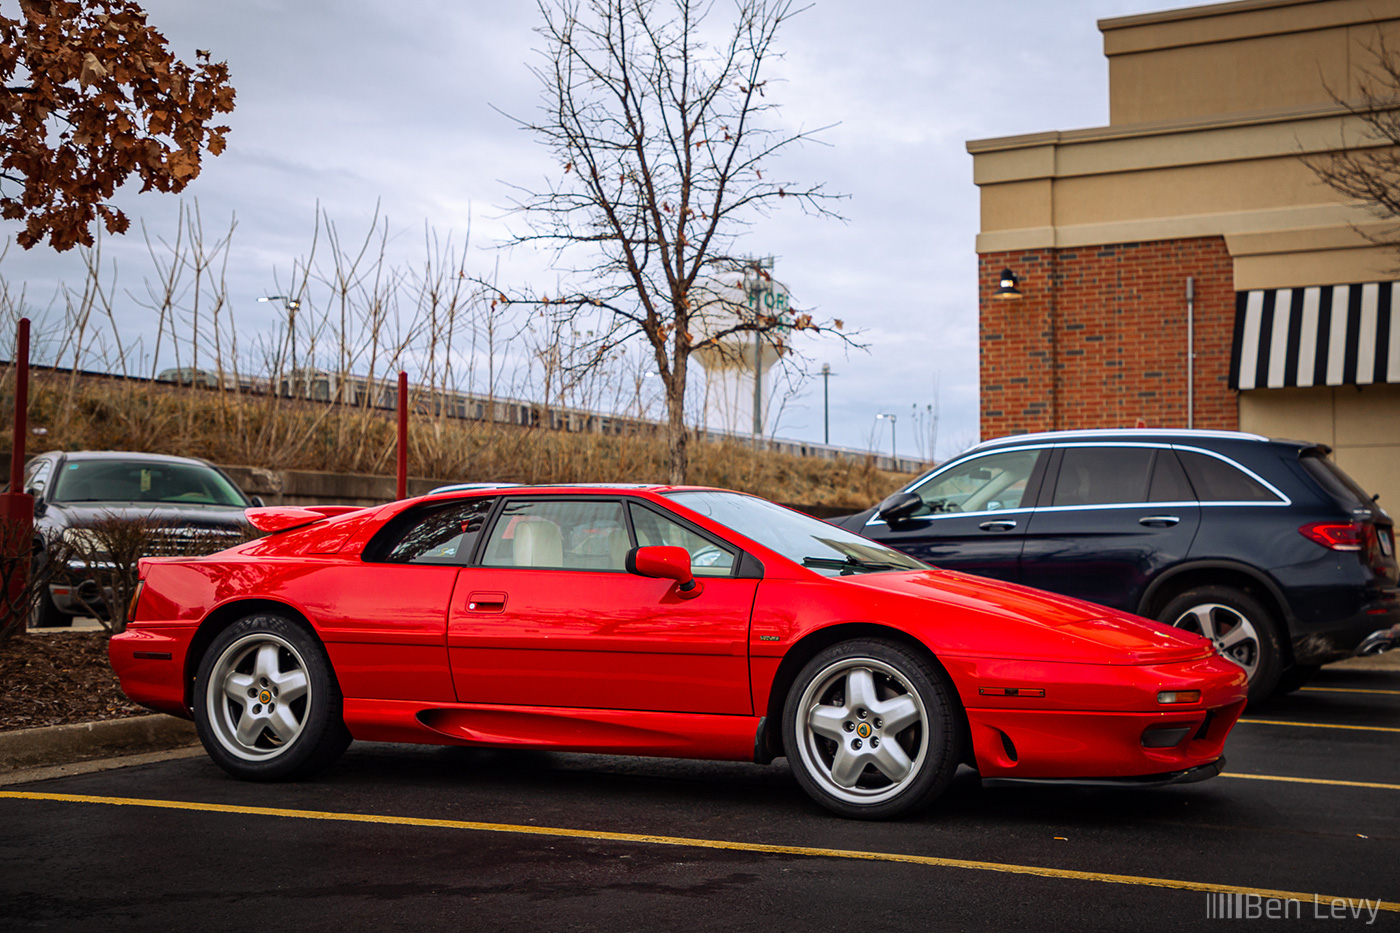 Red Lotus Esprit in River Forest Parking Lot